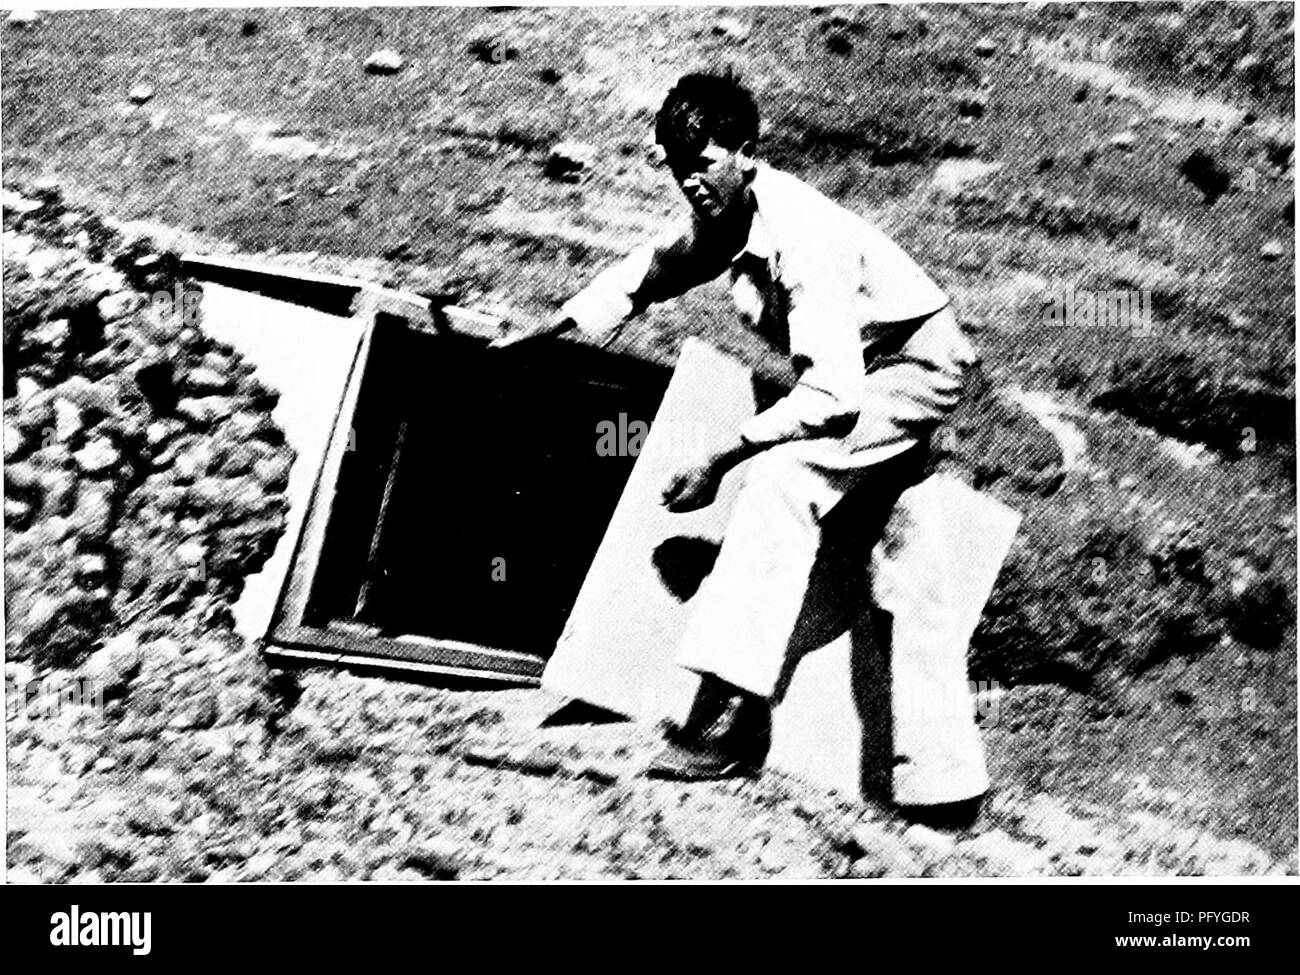 . [Articles about birds from National geographic magazine]. Birds. 626 THE NATIONAL GEOGRAPHIC MAGAZINE. ALMOST READY TO LAUNCH THE PIANO-BOX BLIND On two steel cables it was lowered over the cliff, near the edge of which the author's son is standing. Entering from above by rope ladder, the observer placed his camera on a shelf, lashed down the cover, and awaited the return of the old birds (see illustration, page 625). When the big box first appeared at their very door, the falcons circled suspiciously, but instead of deserting the eggs they finally sailed in to the nest and continued rearing Stock Photo